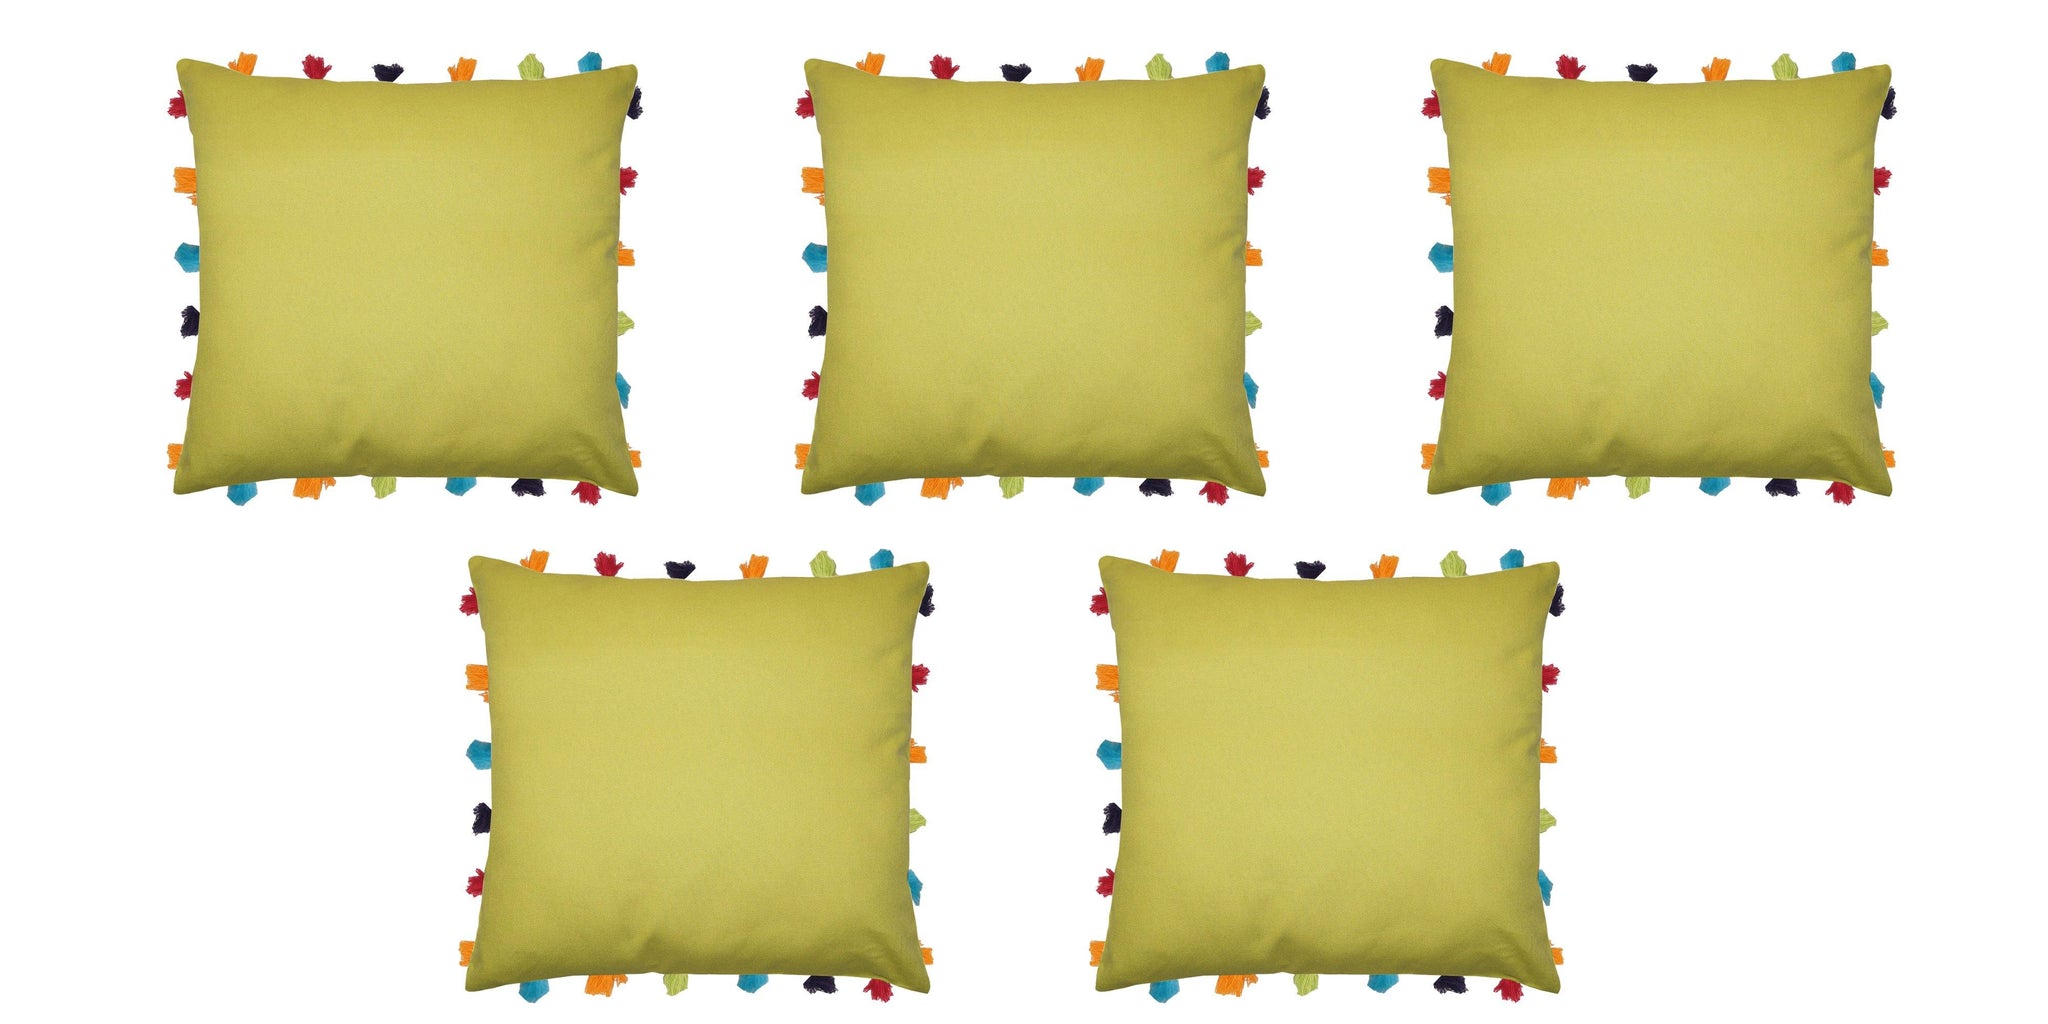 Lushomes Palm Cushion Cover with Colorful tassels (5 pcs, 18 x 18”) - Lushomes